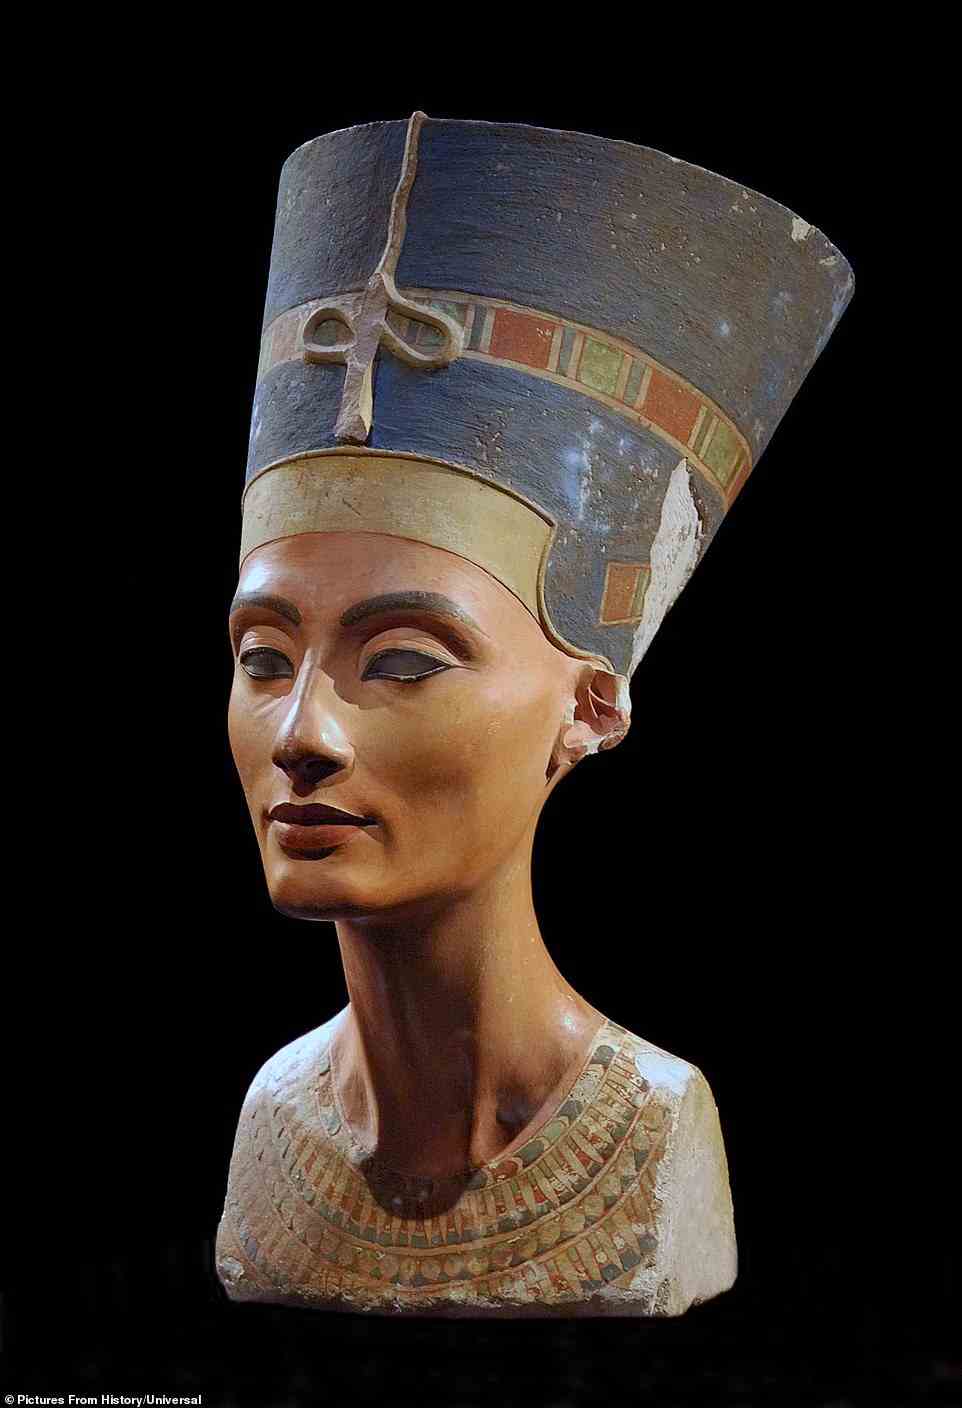 The bust of Nefertiti was found in Egypt in 1912 at Tell el-Amarna, the short-lived capital of Nefertiti's husband, the Pharaoh Akhenaten. It is now housed in Berlin